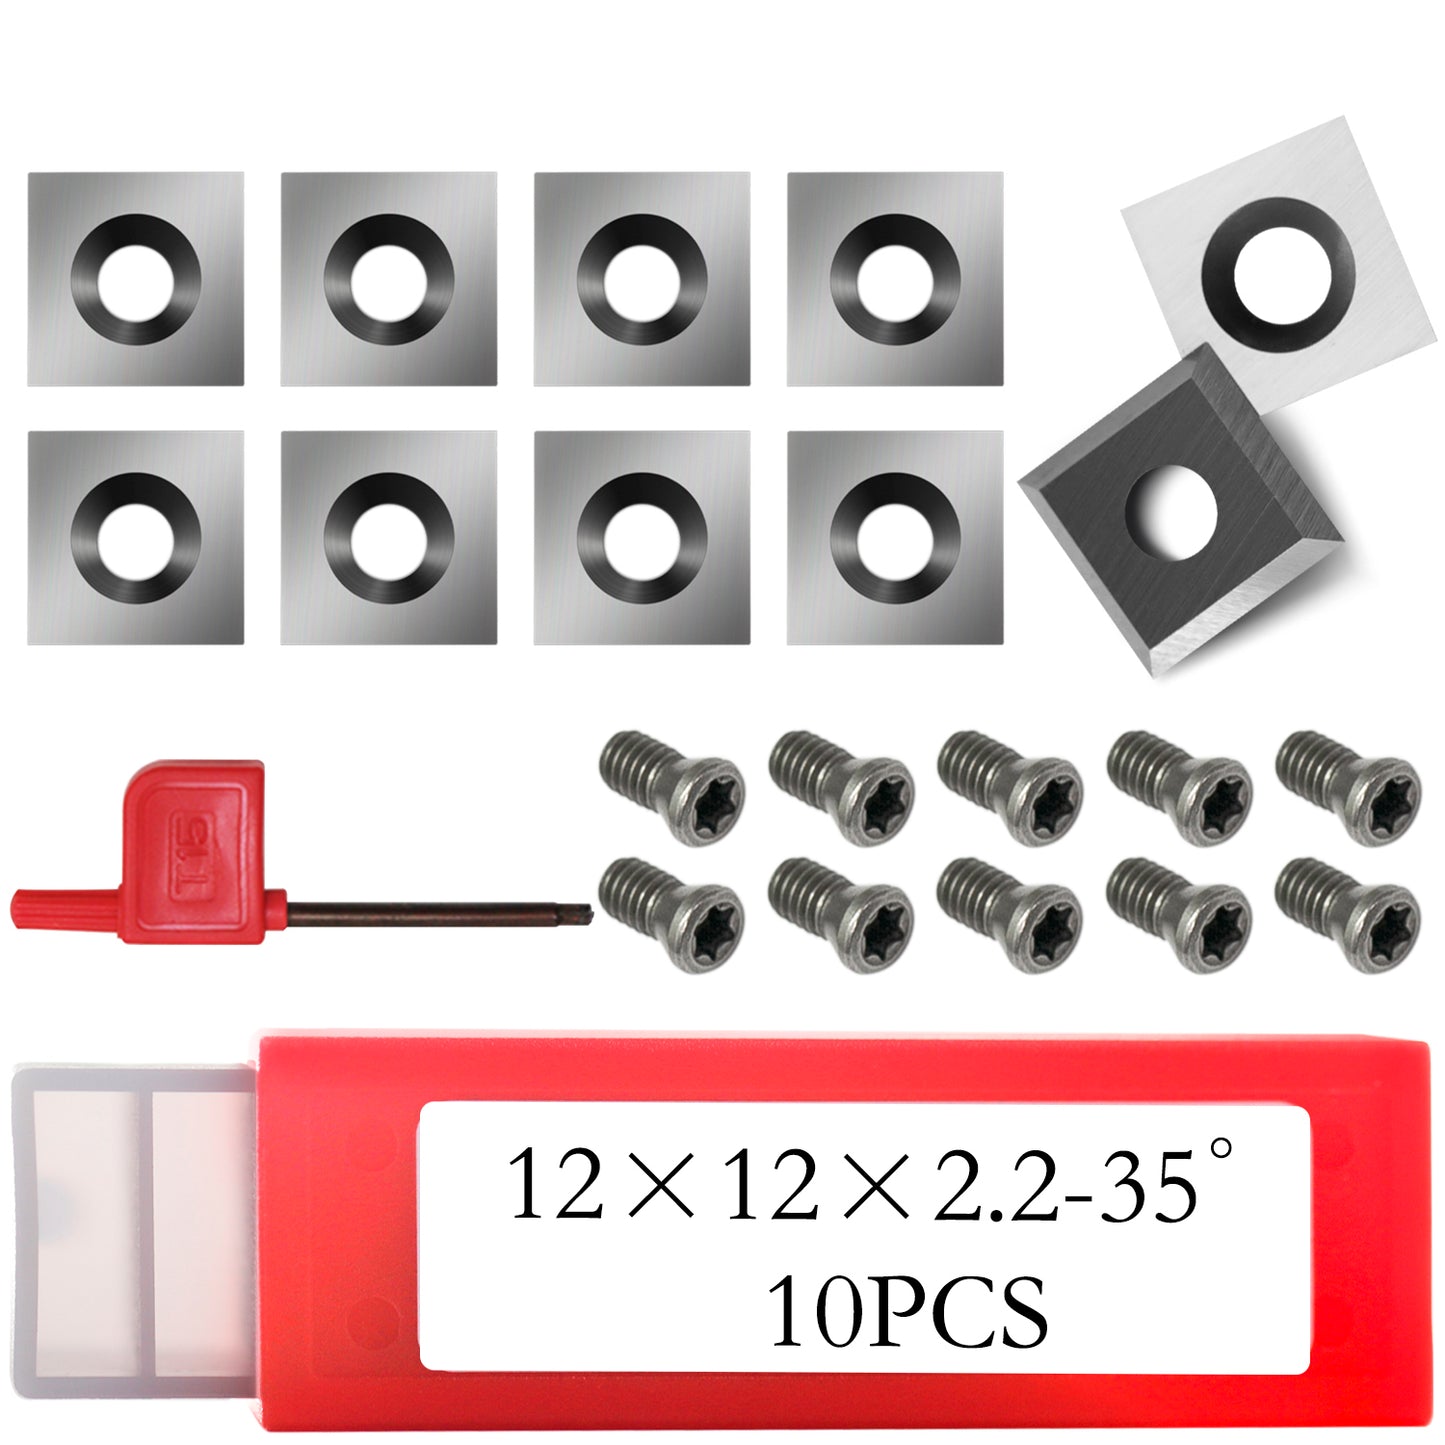 Square Blades 12x12x2.2mm-35°-4 Edge Tungsten Carbide Inserts Replacement Cutters for Woodworking Flush Trim Router Bits